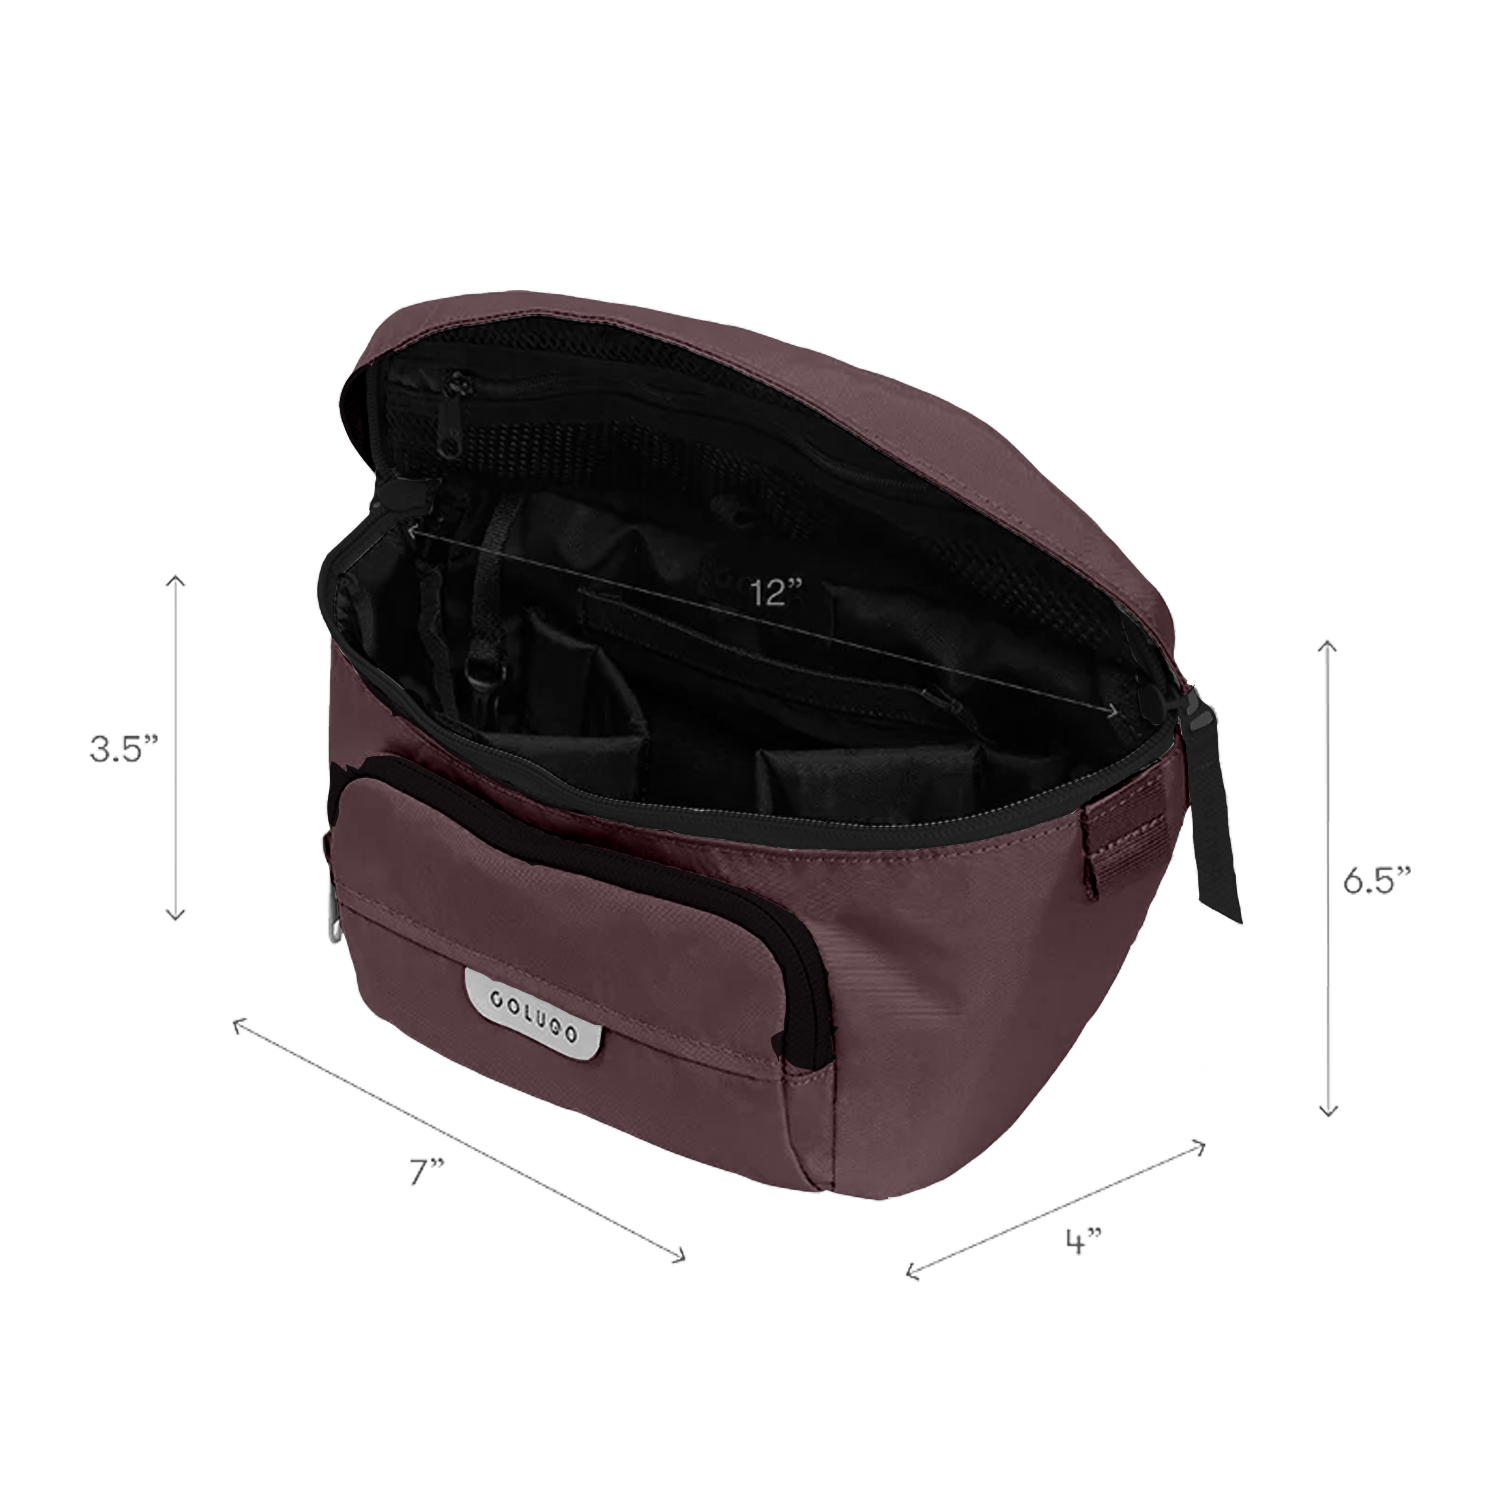 Colugo The on The Go Organizer and Fanny Pack in Black